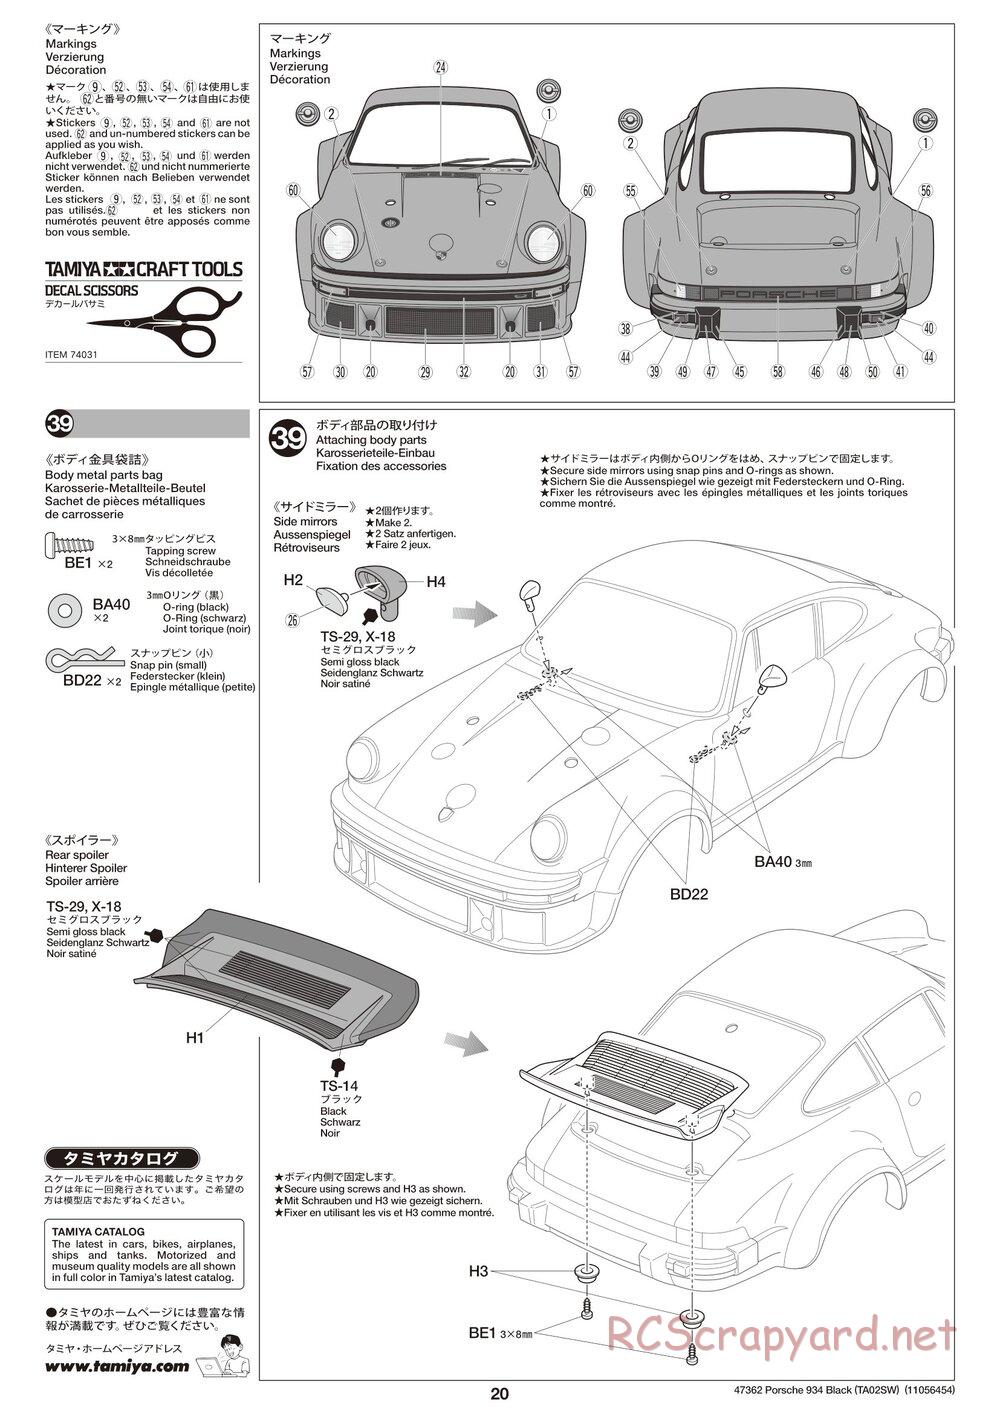 Tamiya - TT-02 White Special Chassis - Manual - Page 20